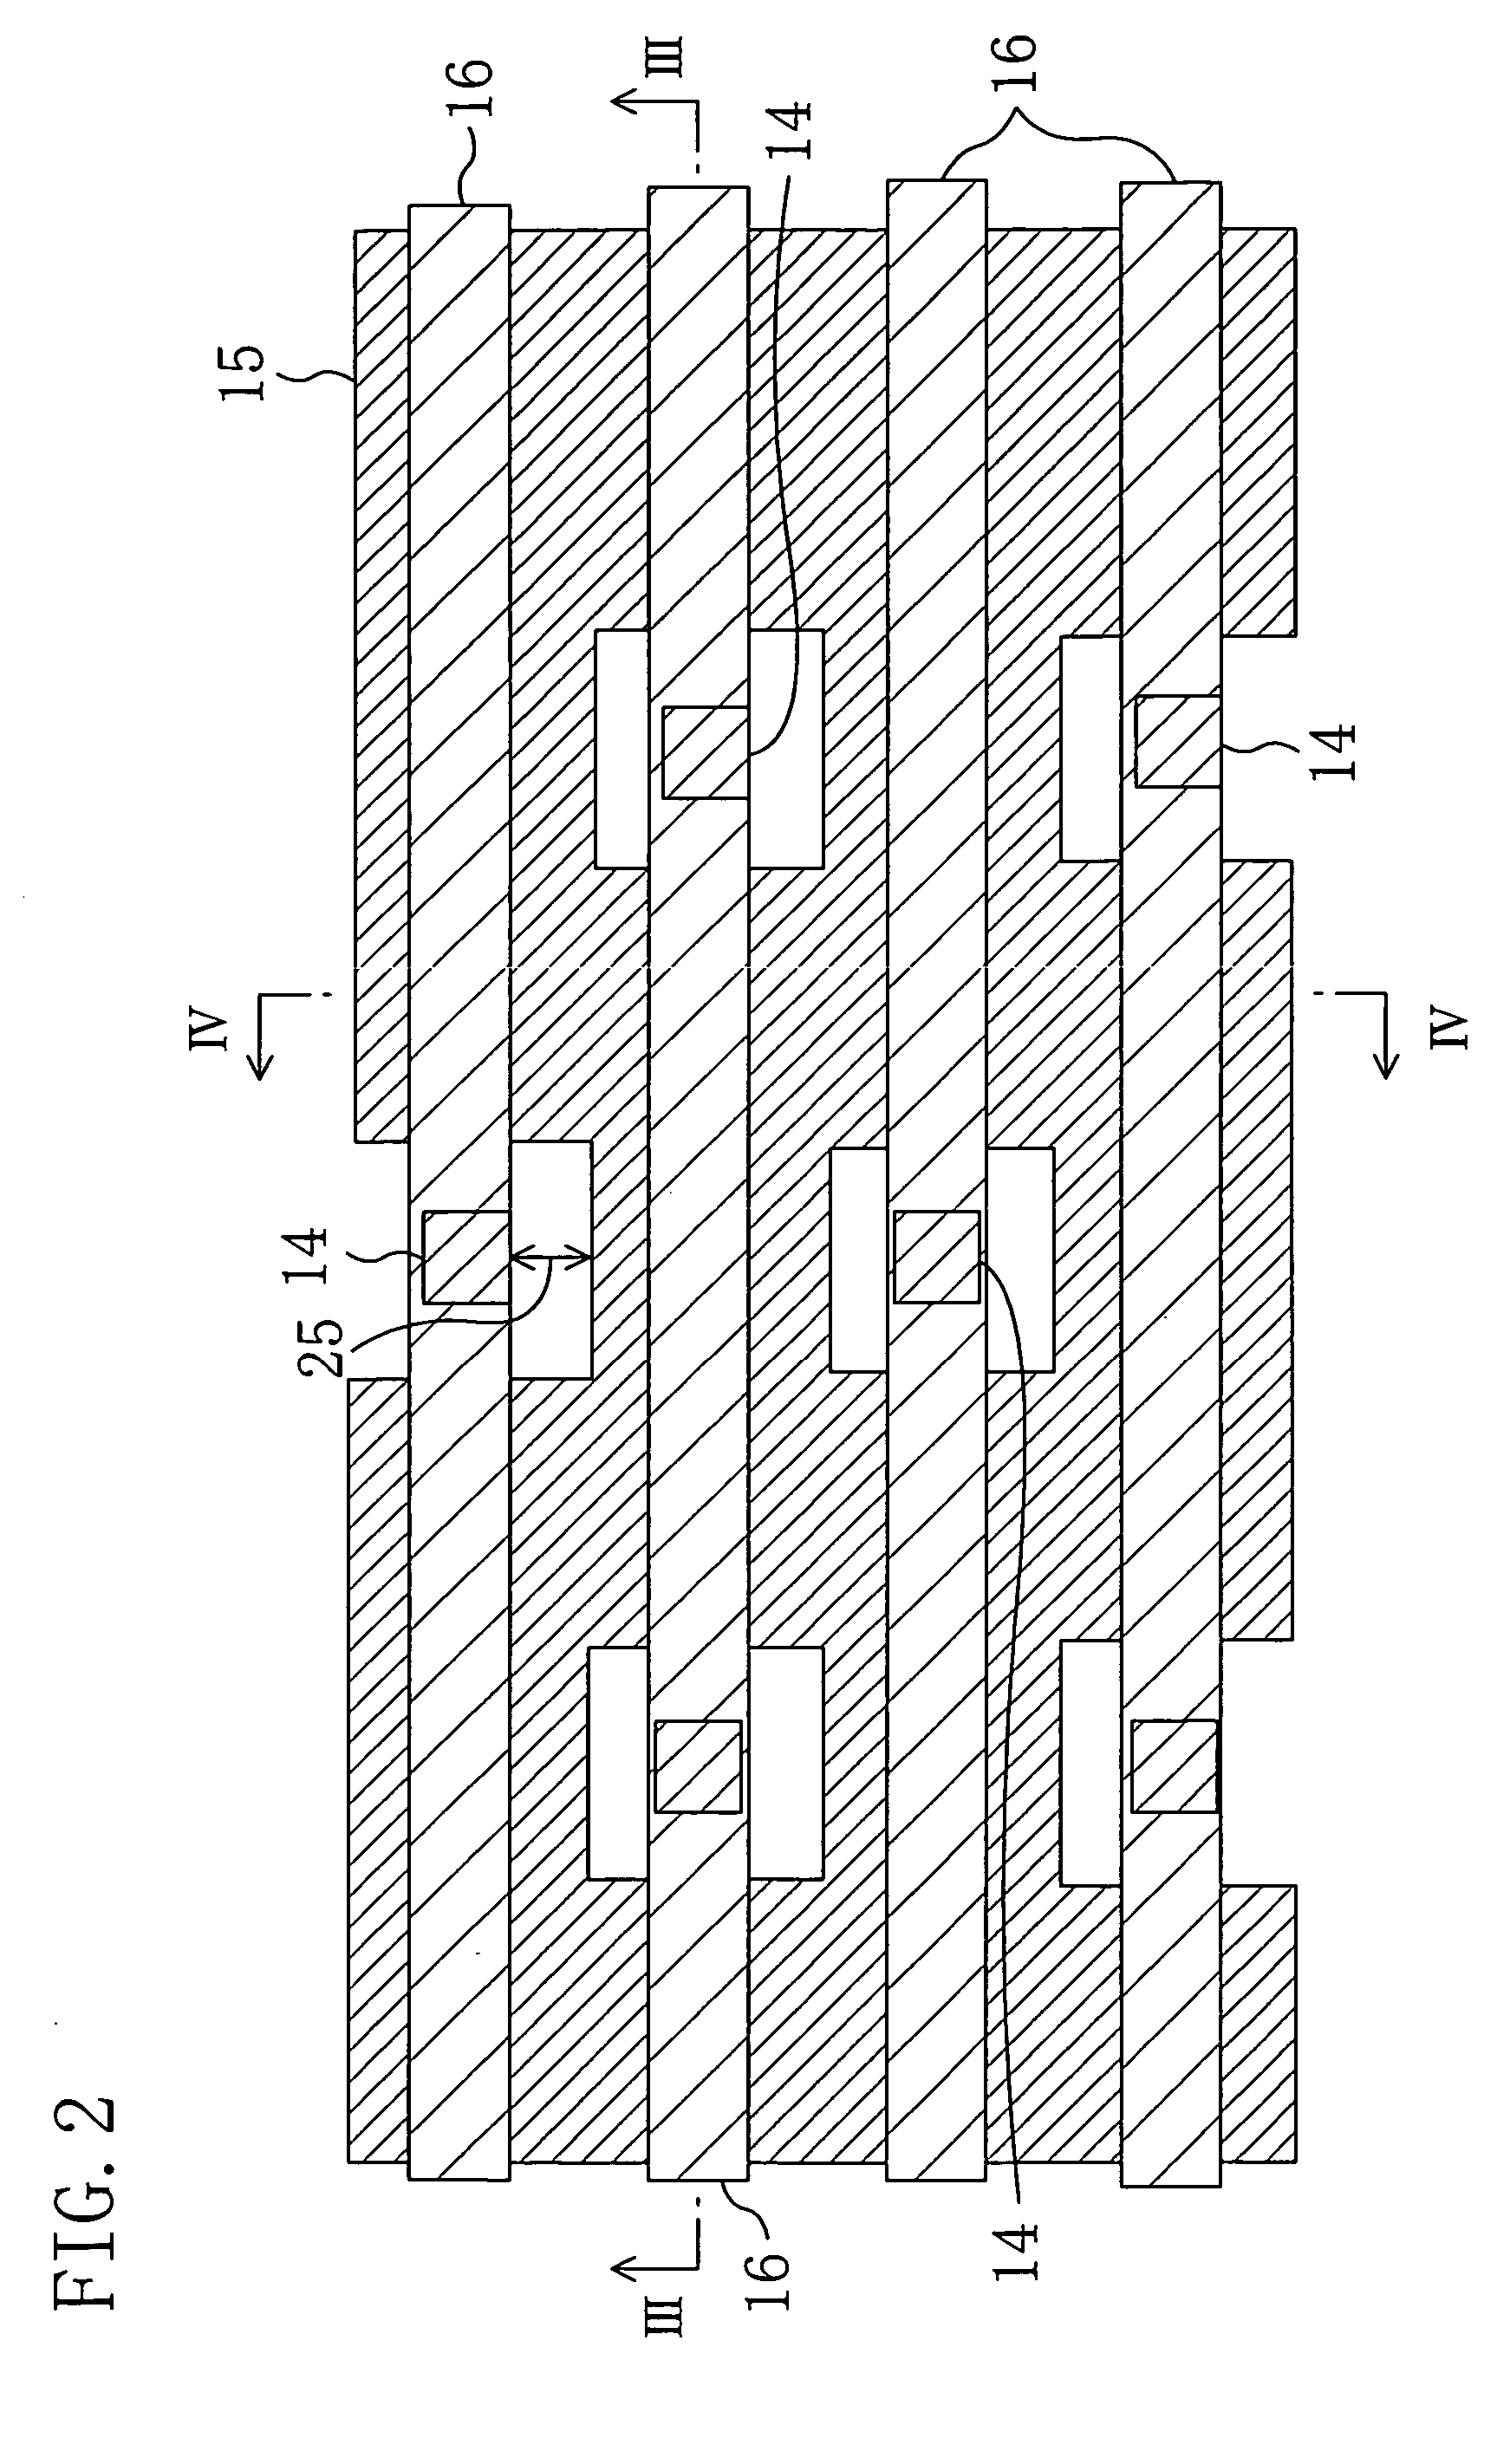 Evaluation semiconductor device